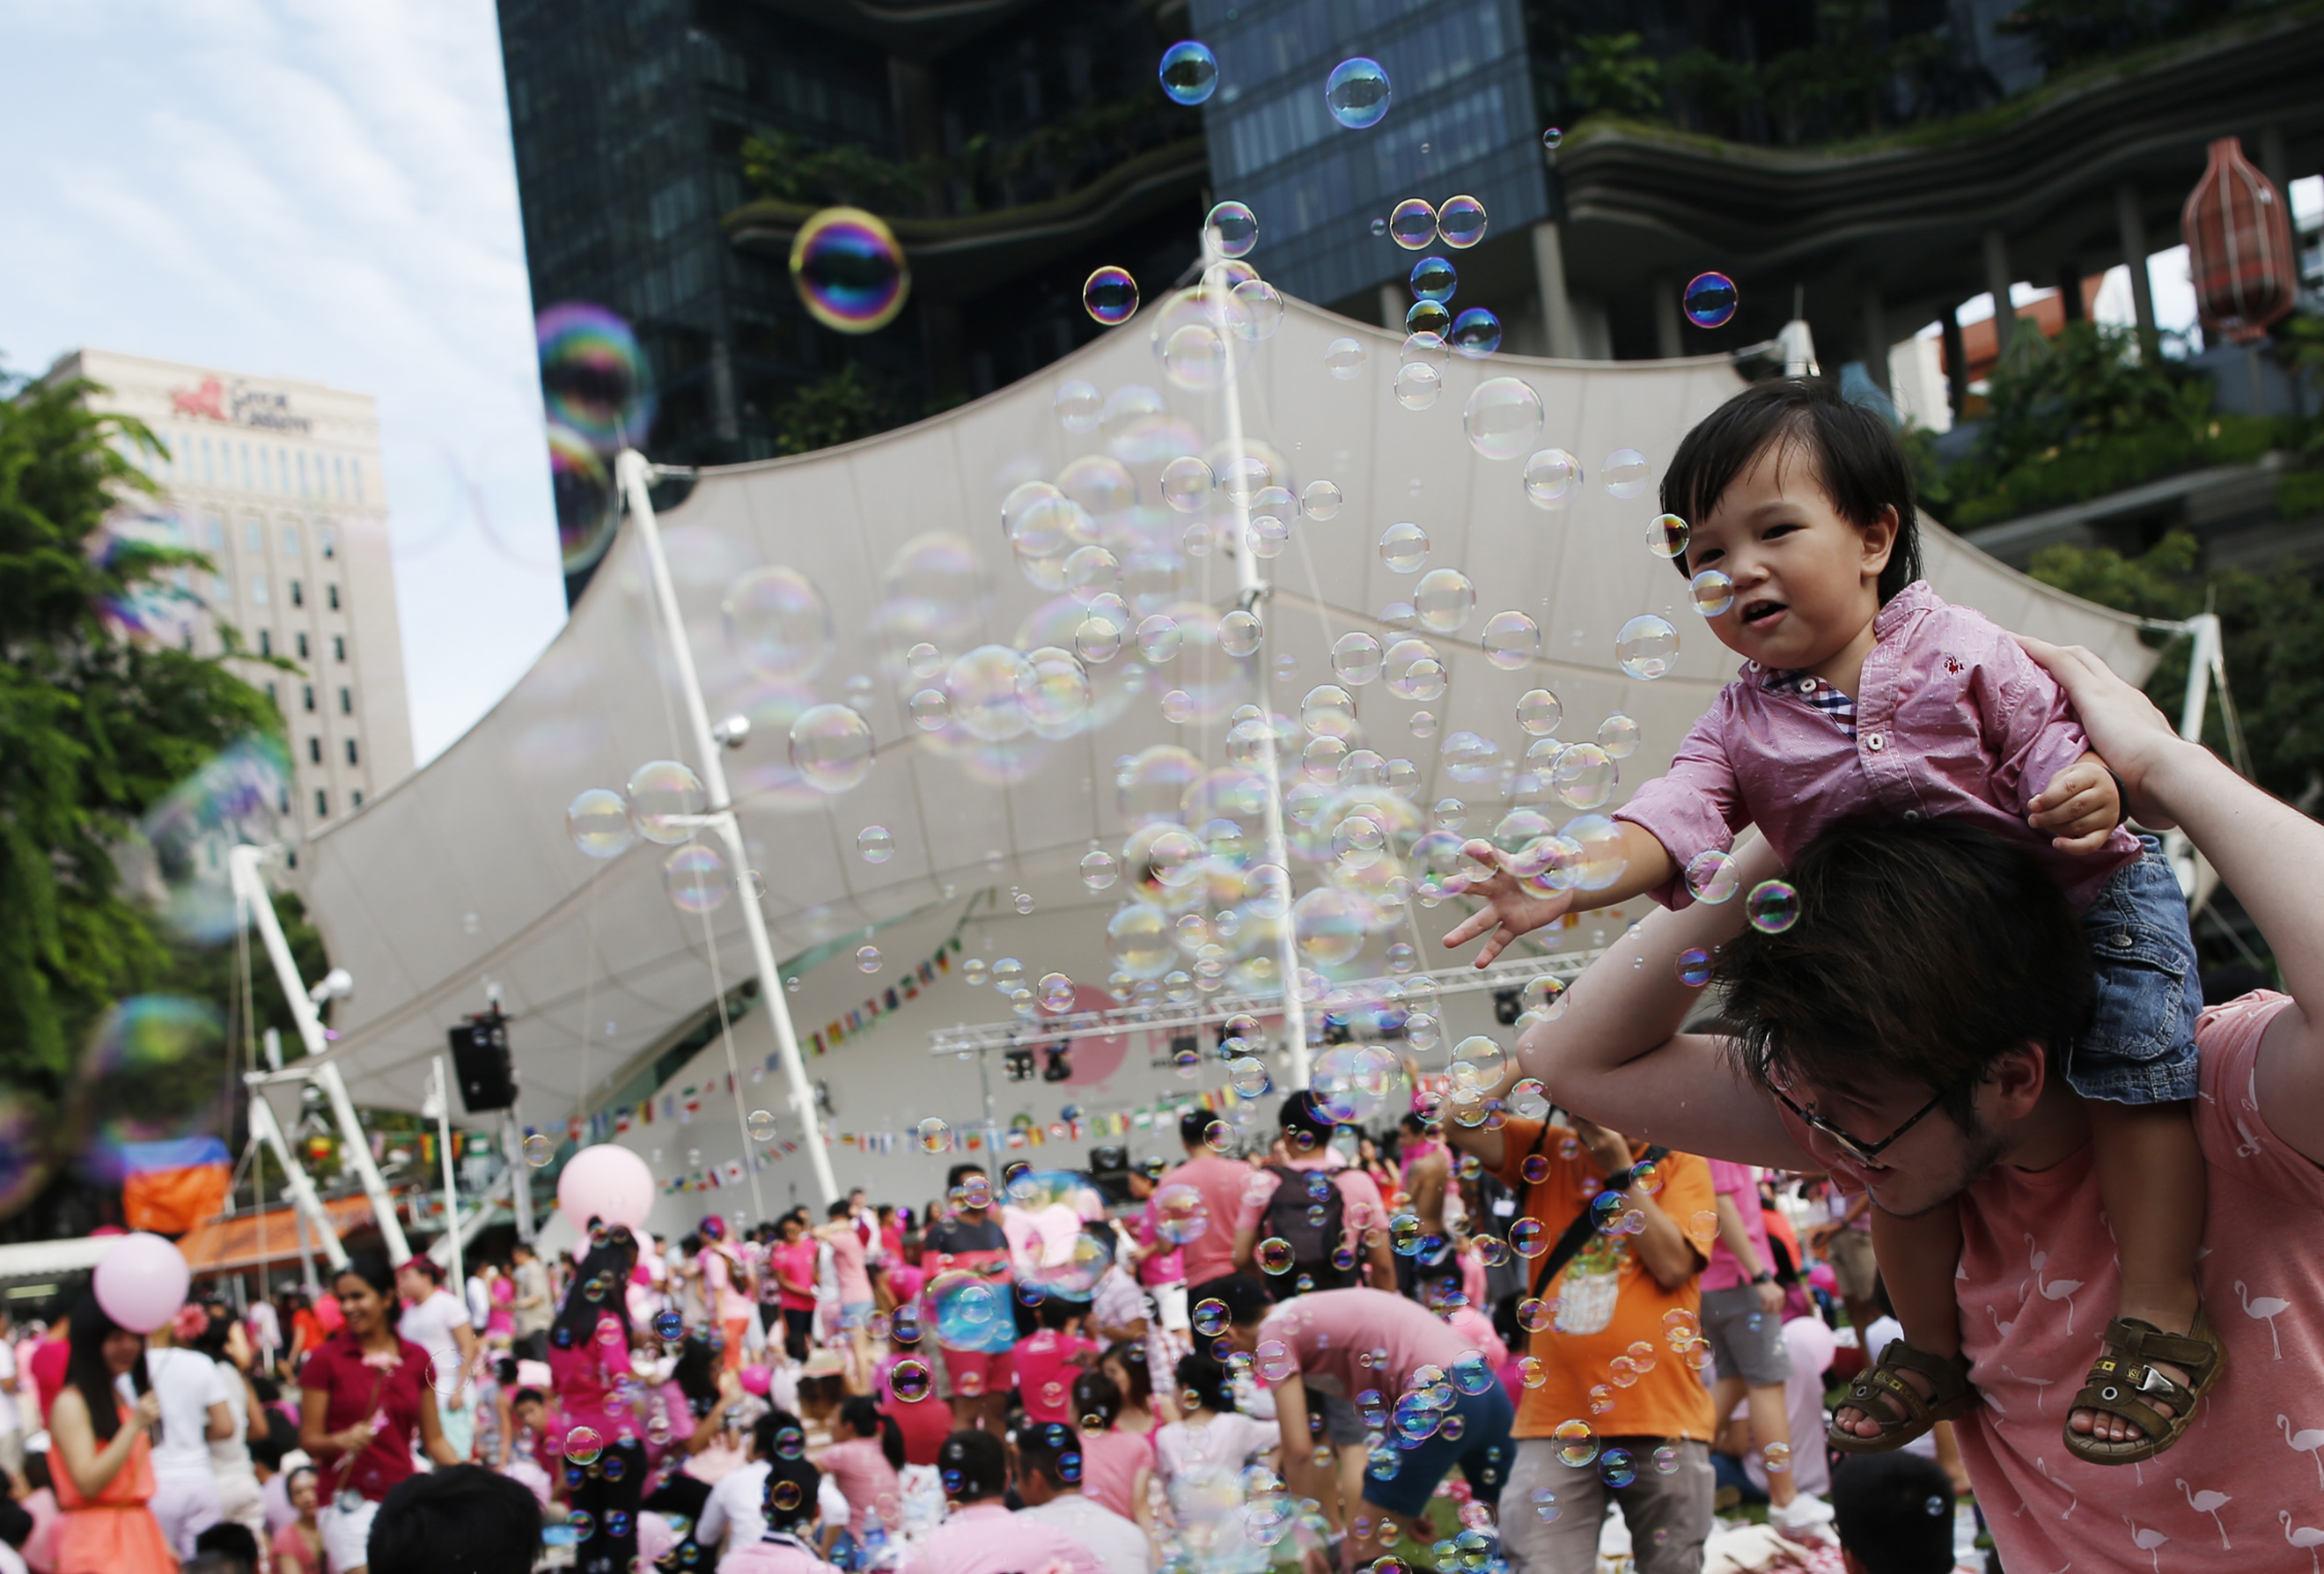 Toddler plays with bubbles as participants wait to take part in the forming of a giant pink dot at the Speakers' Corner in Hong Lim Park in Singapore